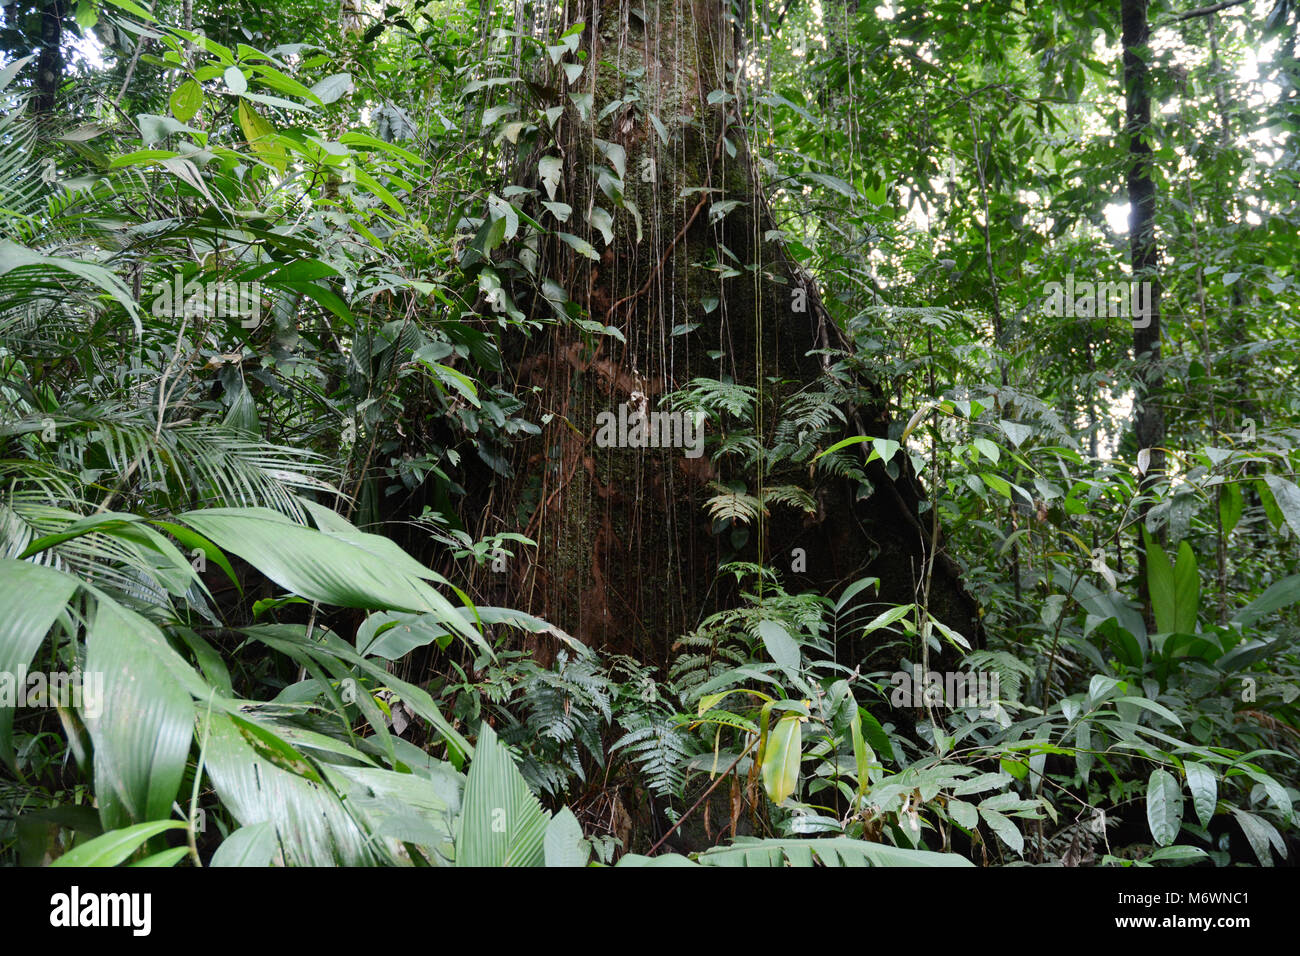 An ancient old growth tree in a tropical rainforest, Corcovado National Park, in the Osa Peninsula of Costa Rica. Stock Photo